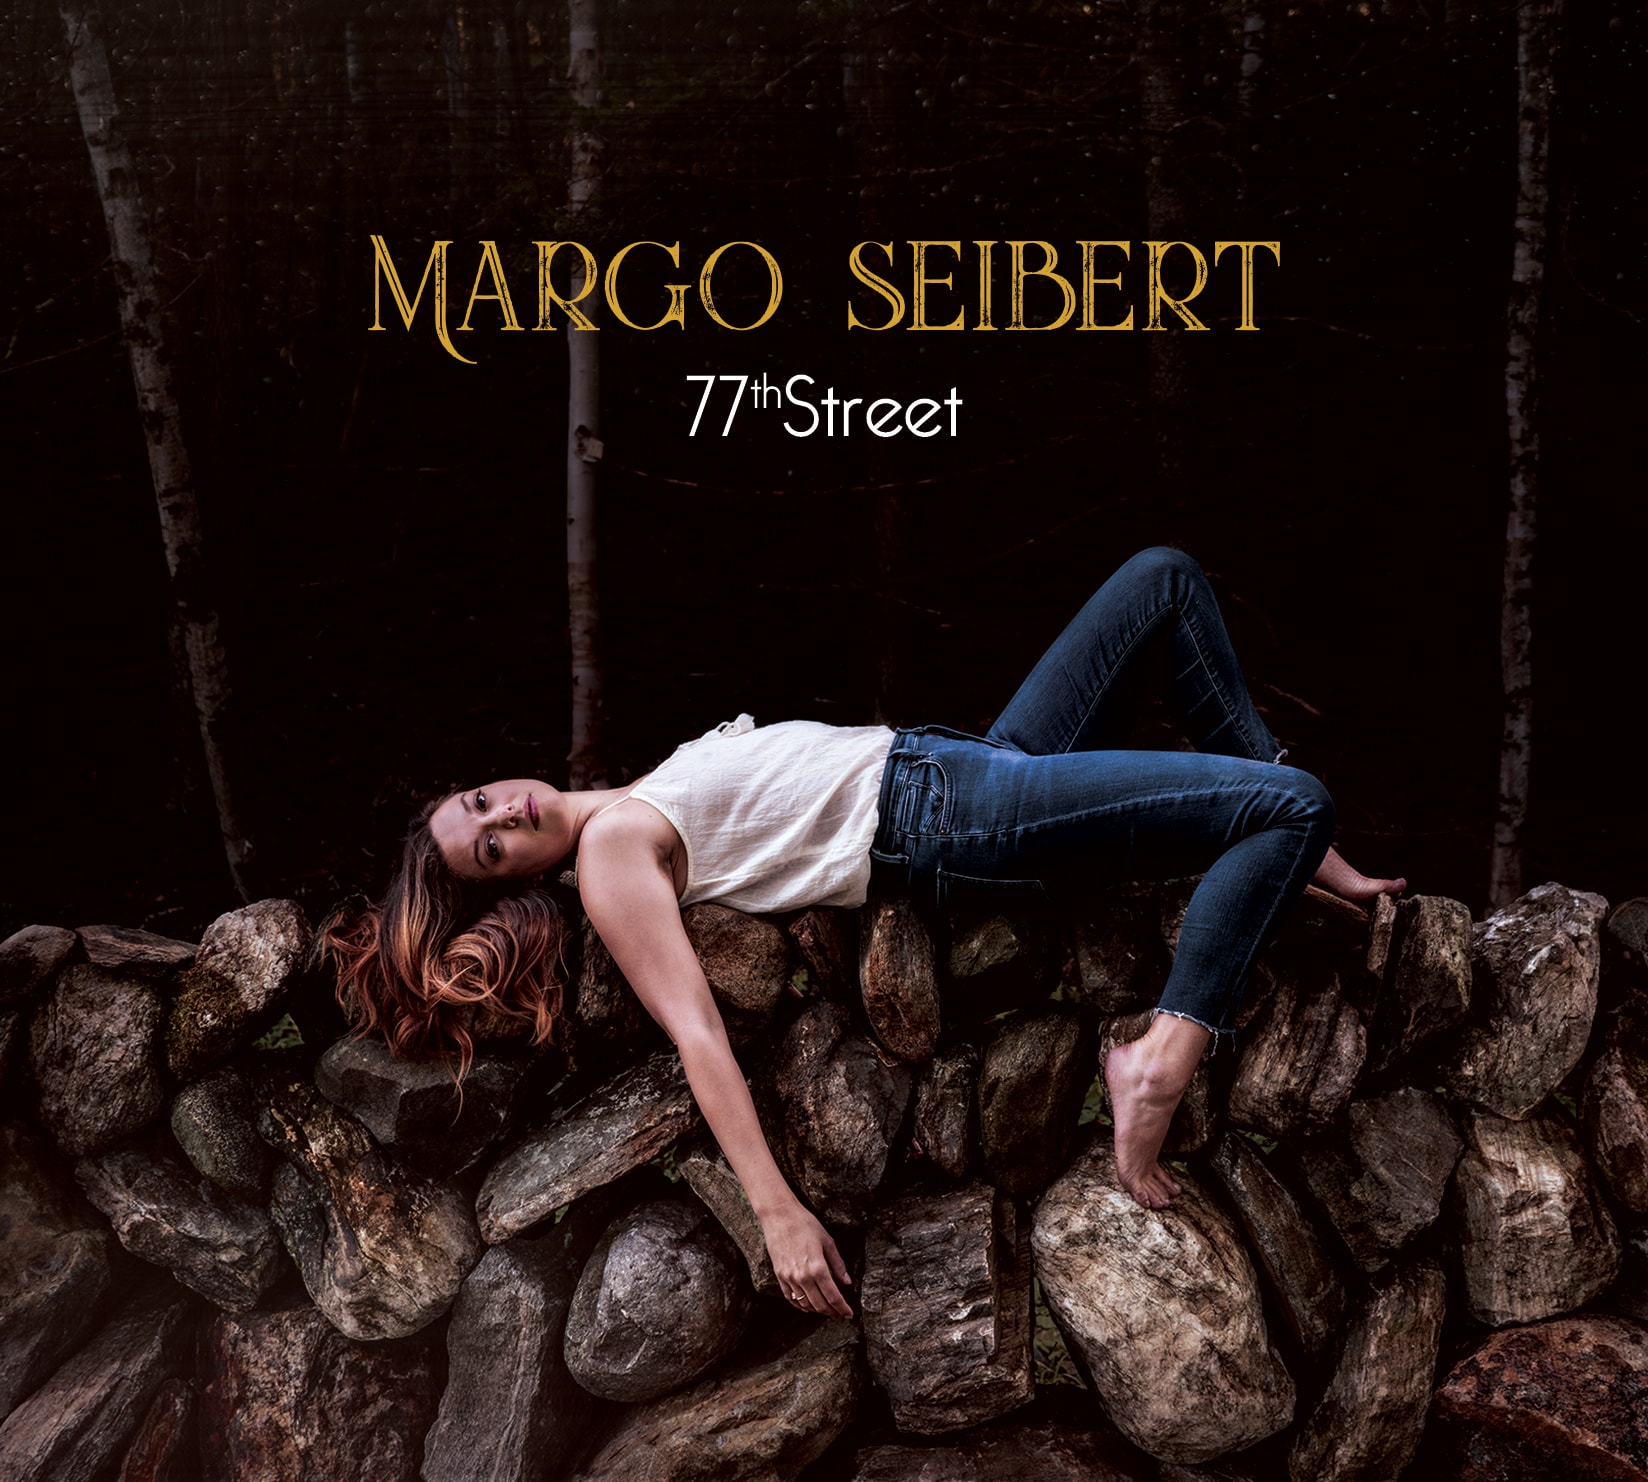 Margo Seibert's debut album '77th Street,' was released by Yellow Sound Label in October 2018.